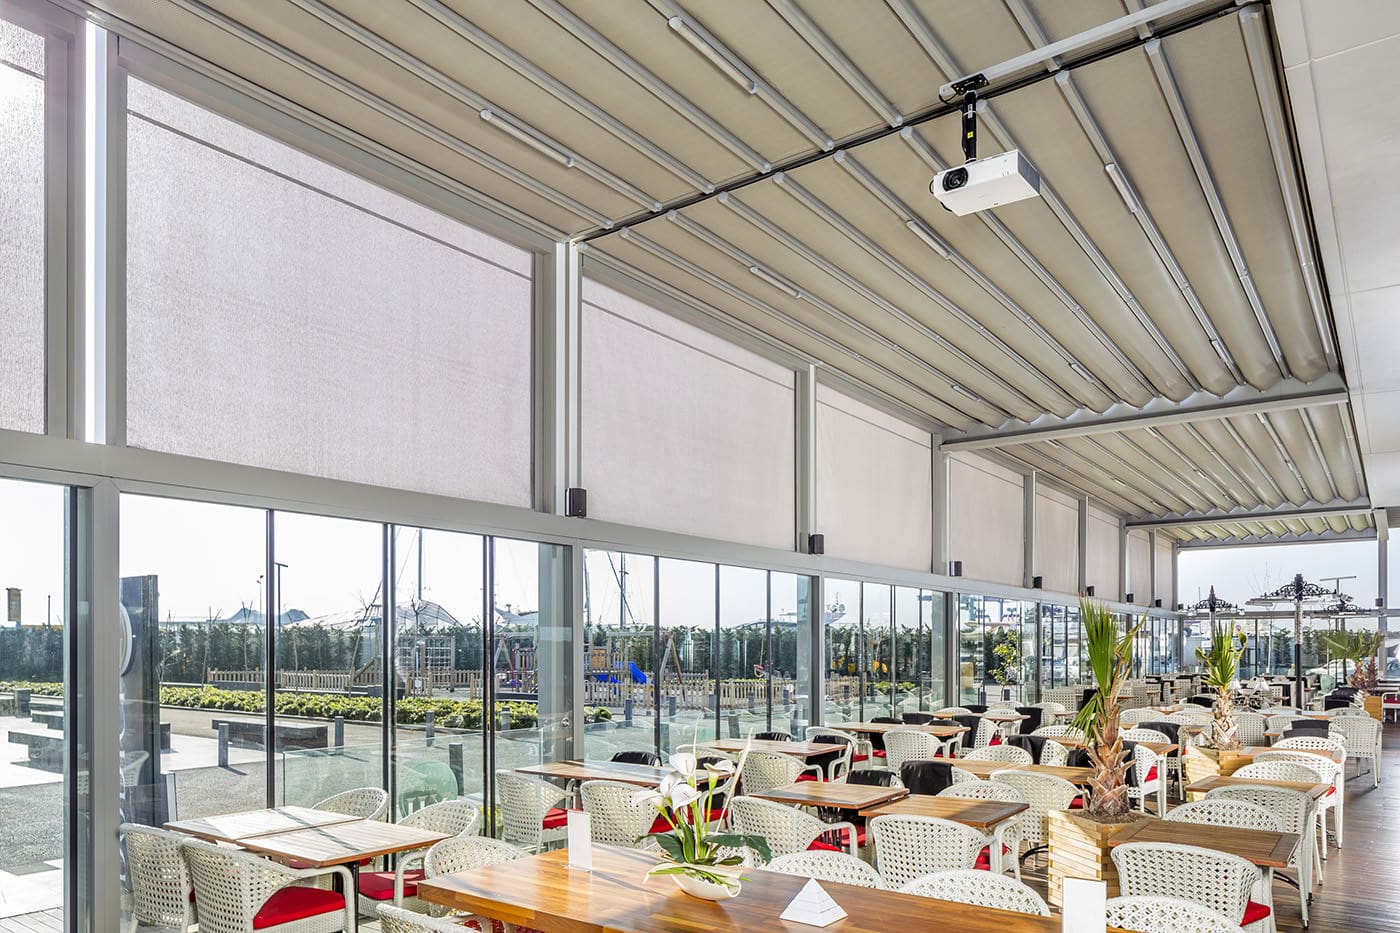 Rooftop commercial dining space installed with Palmiye Fabric Retractable Awnings by Luxaflex.